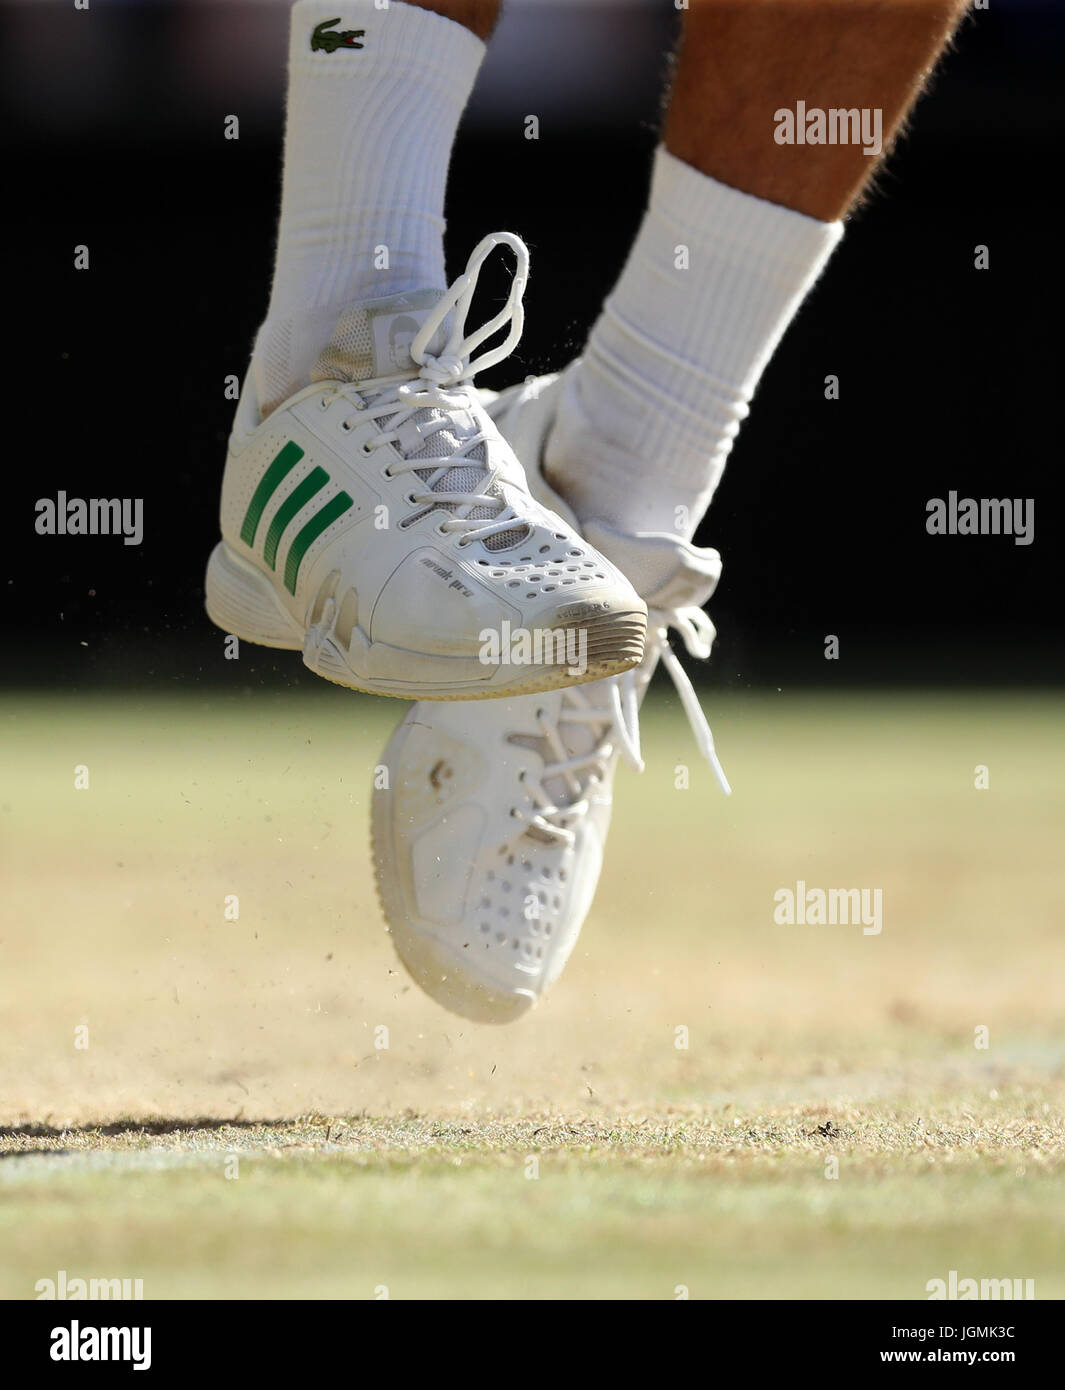 The Adidas trainers of Novak Djokovic on day of the Wimbledon Championships at The All England Lawn Tennis and Croquet Club, Wimbledon. PRESS ASSOCIATION Photo. Picture date: Saturday July 8, 2017.